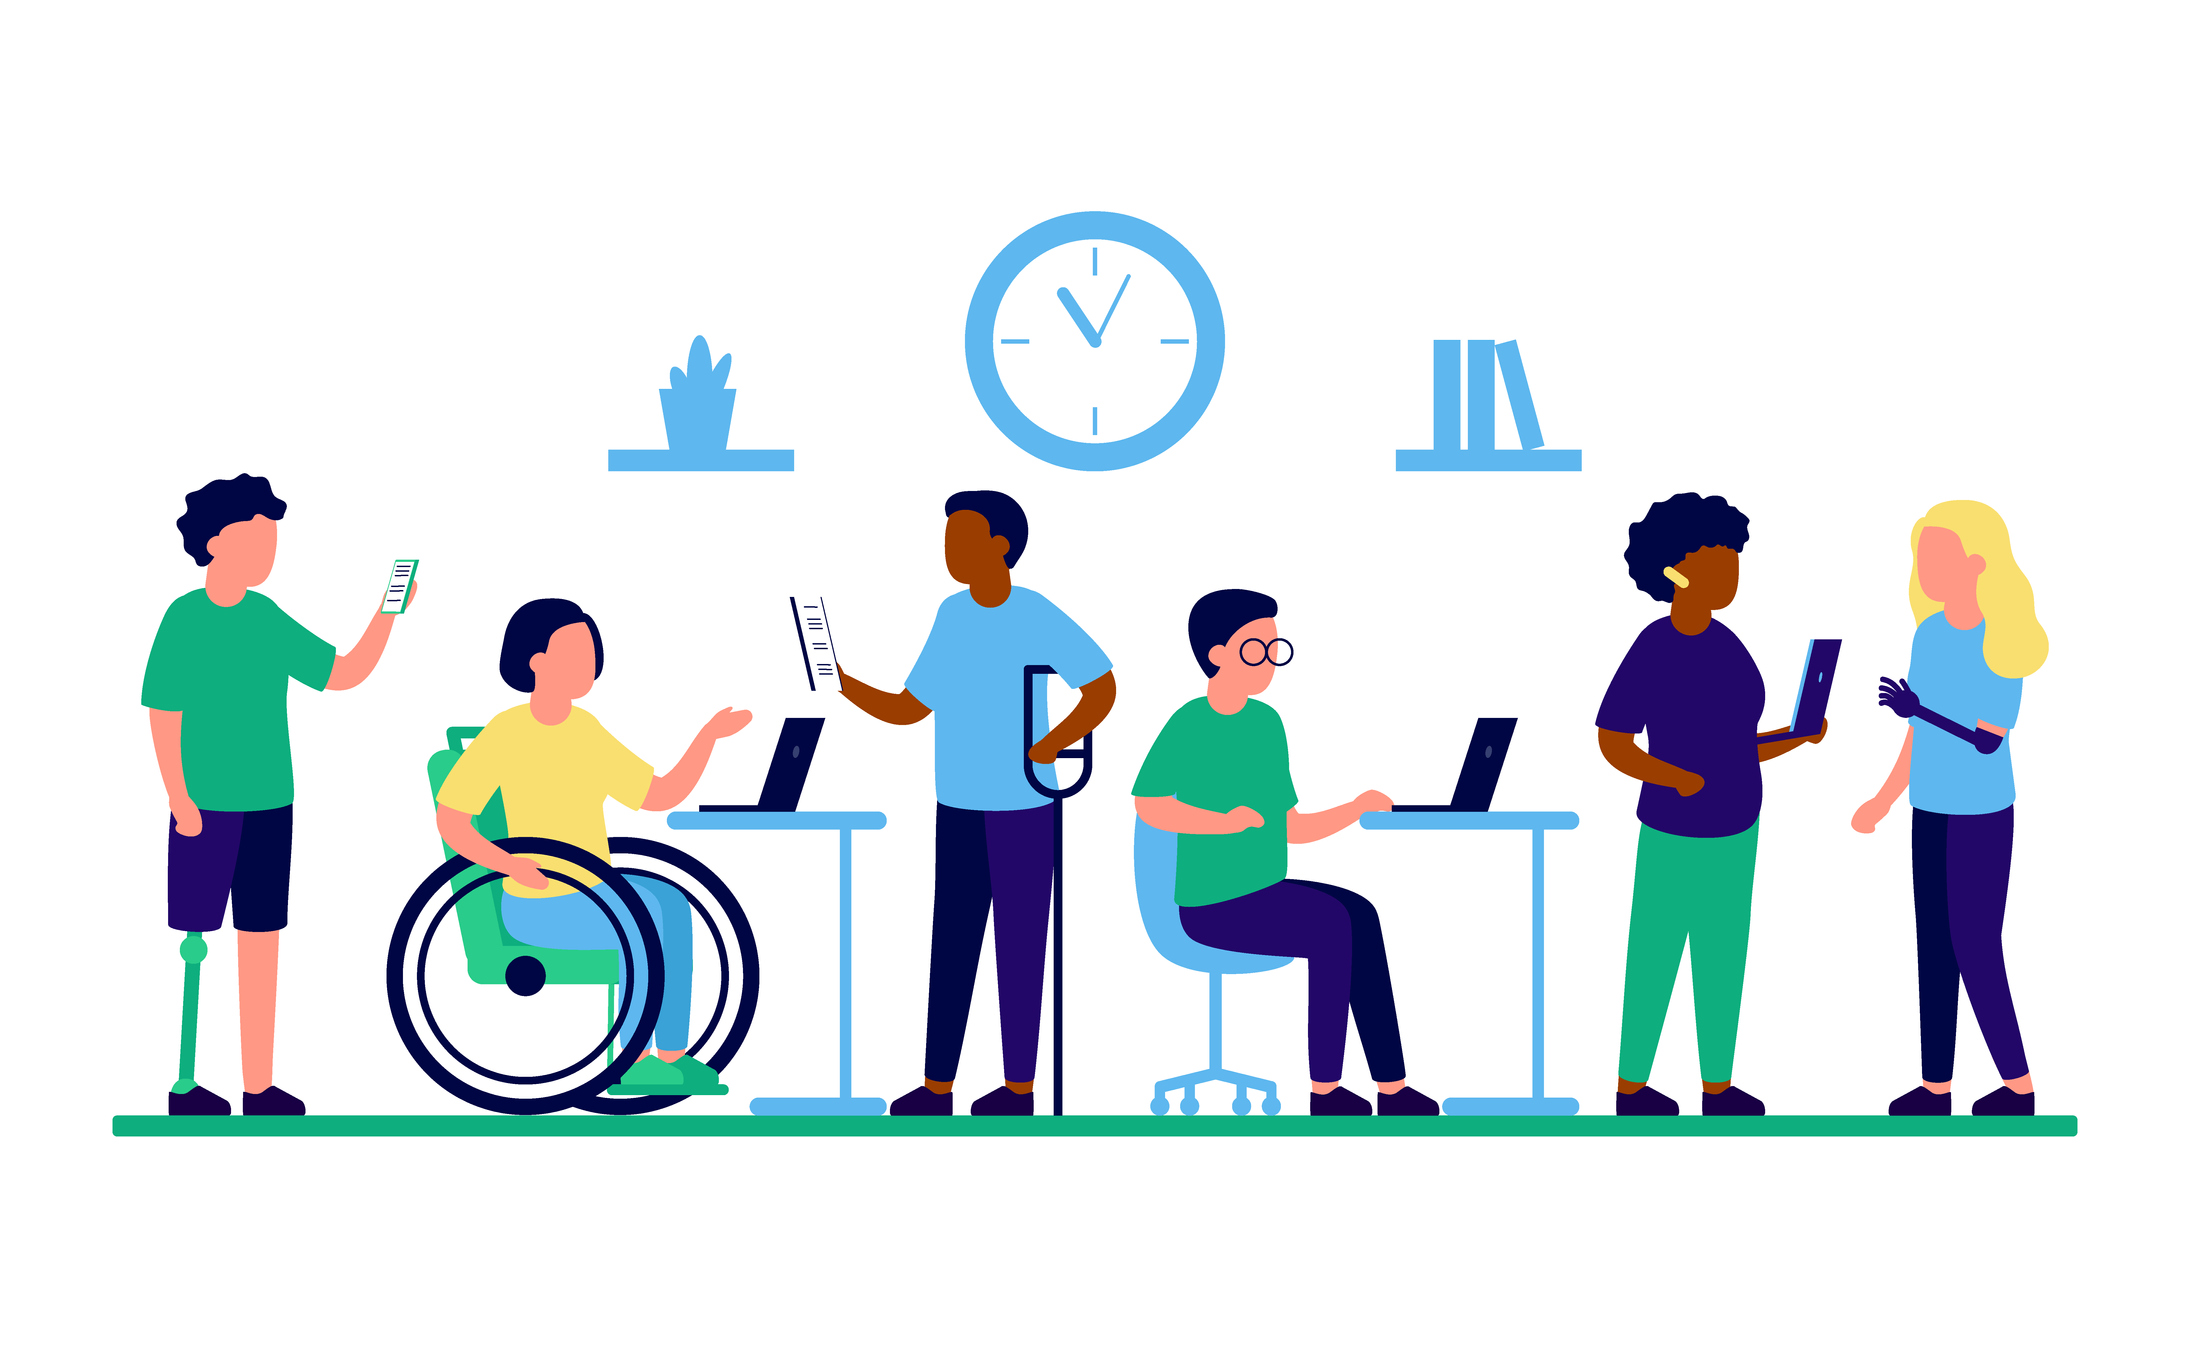 Employee people with disabilities and inclusion work together in office.